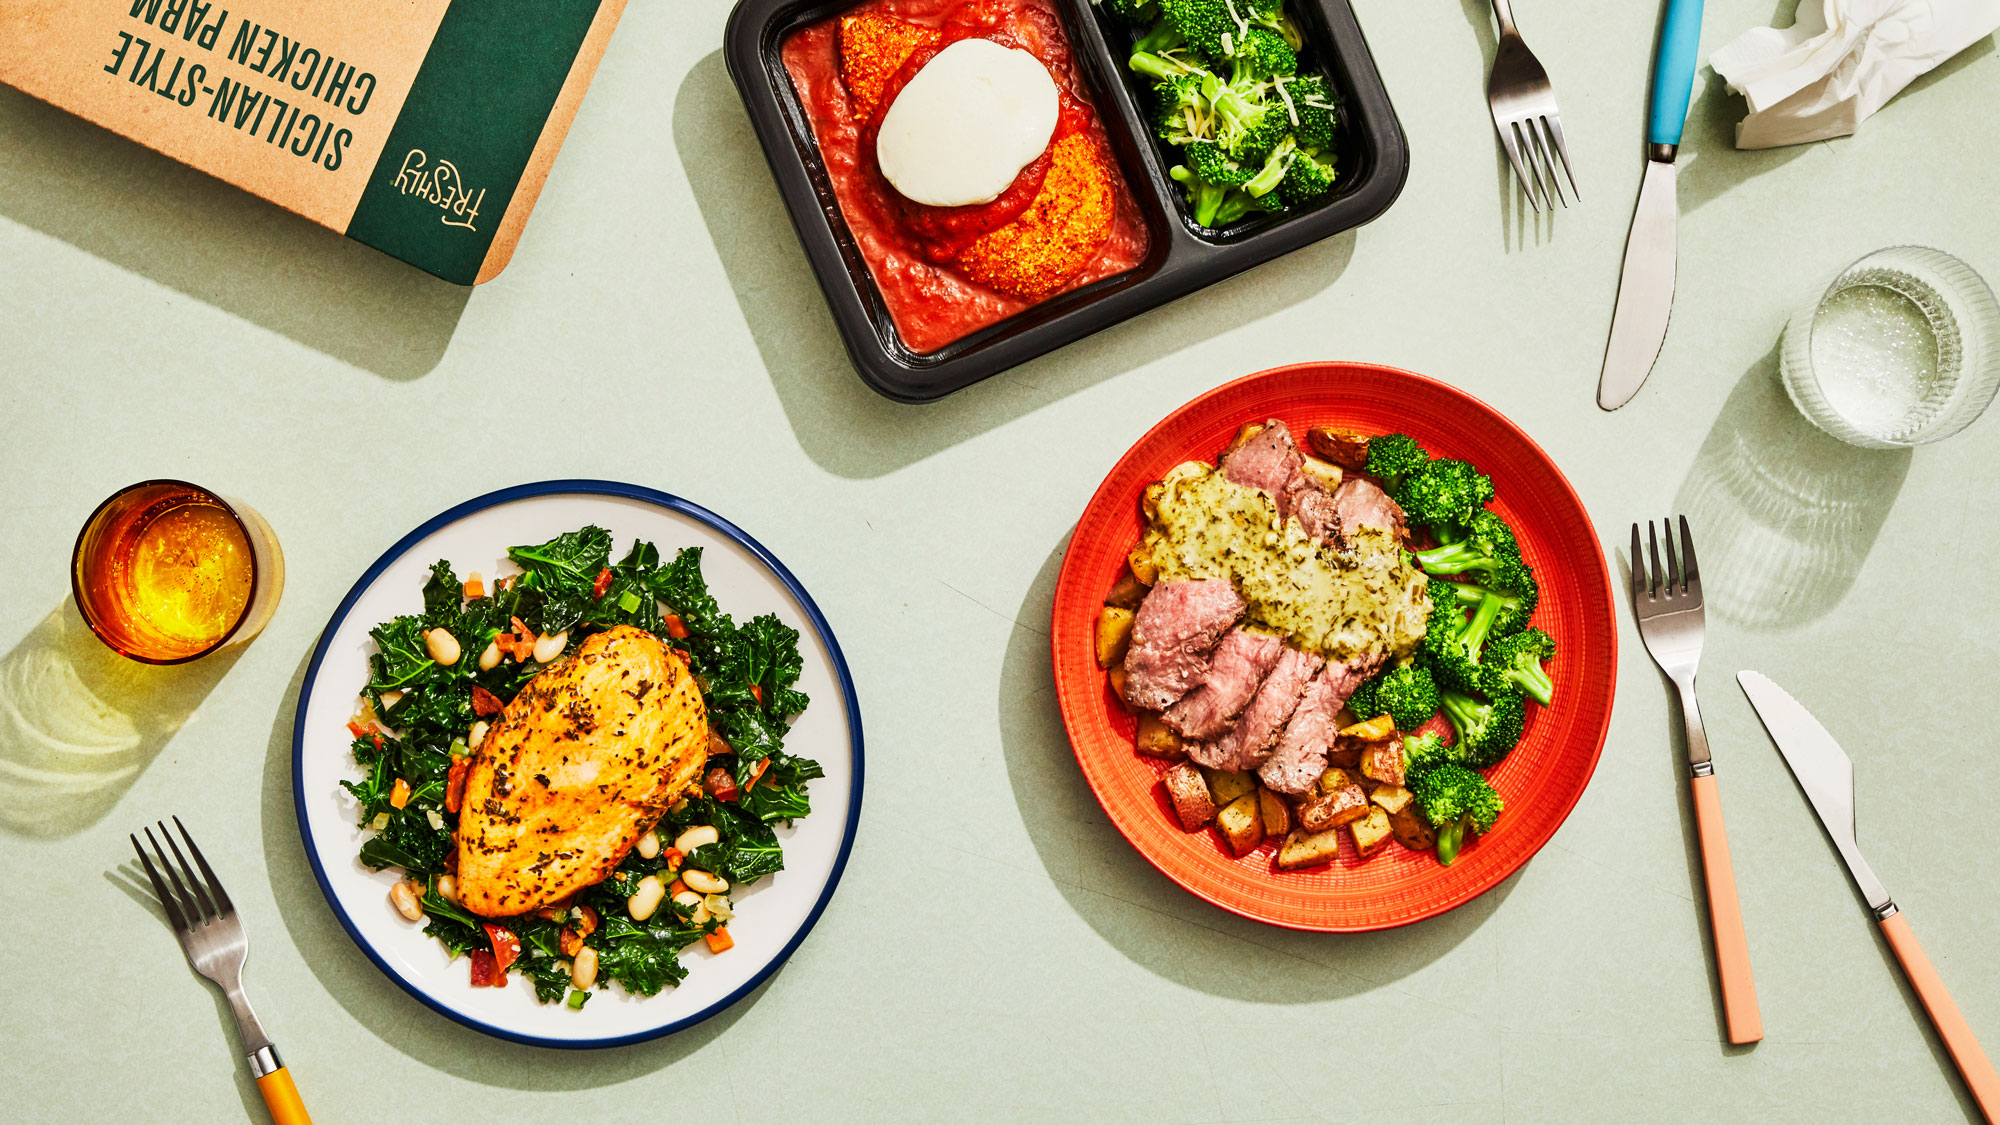 The Top 6 Reasons Why Prepared Meals Will Make Eating Healthier Way Easier